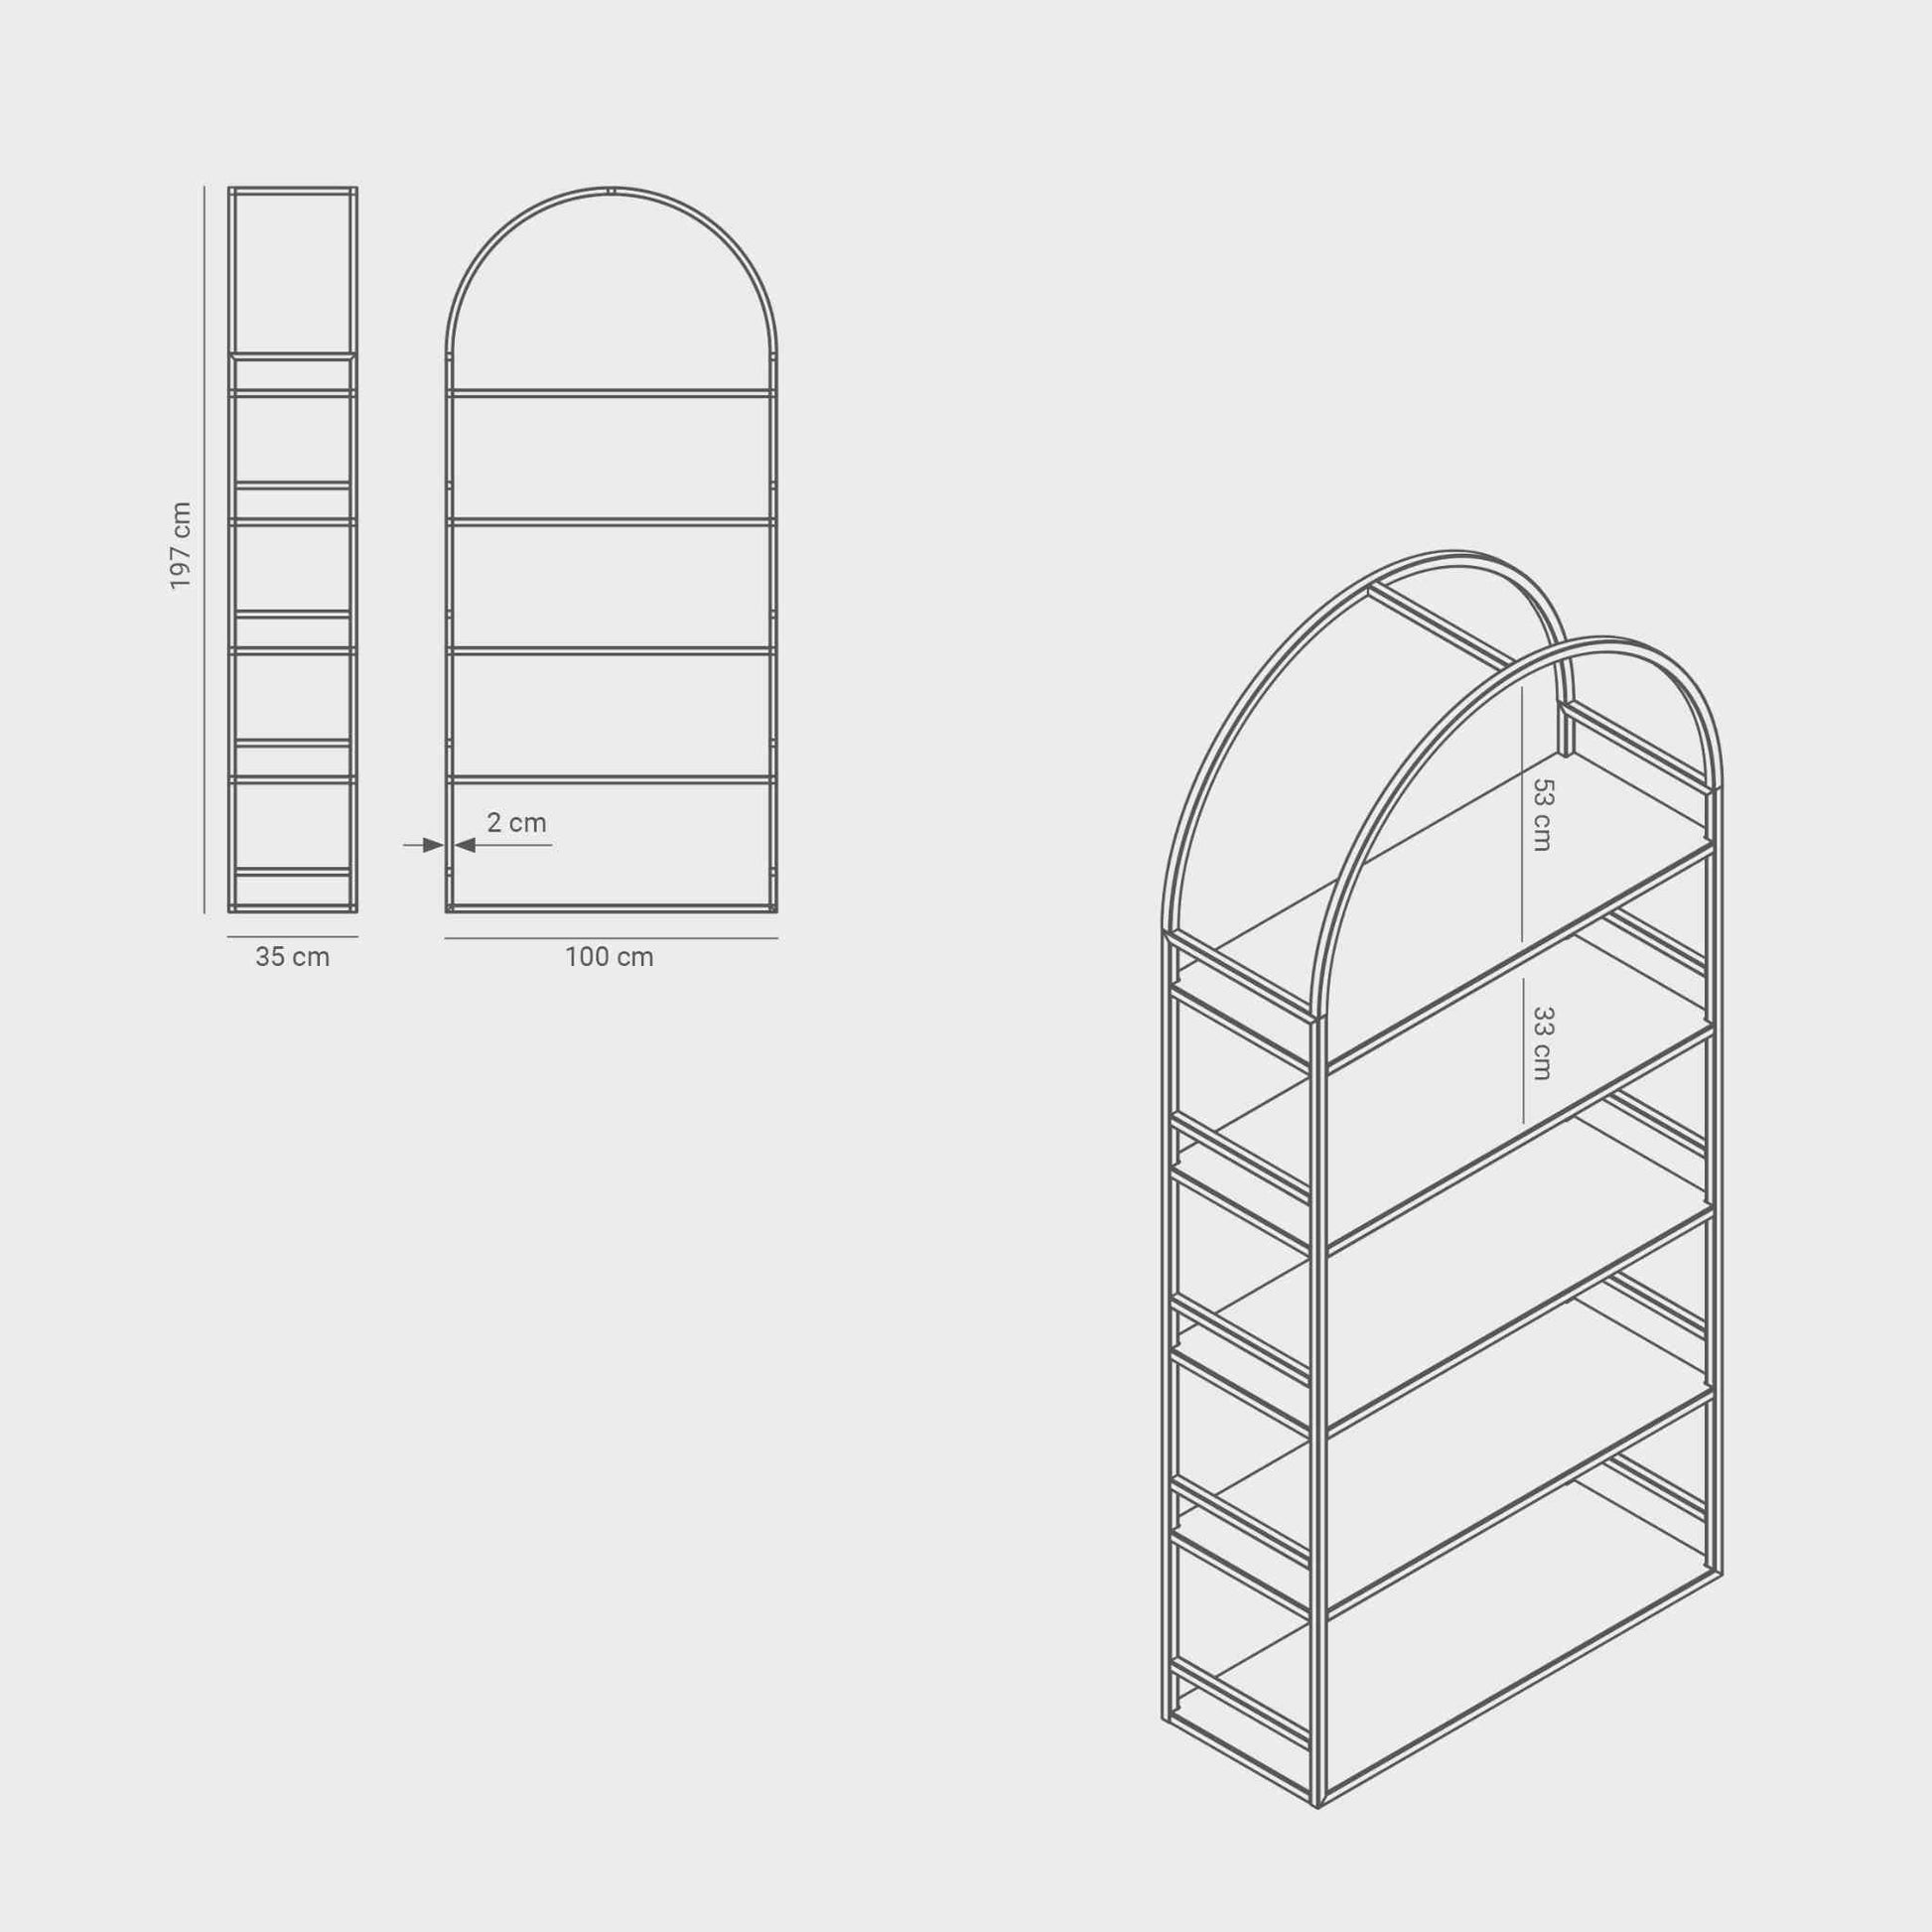 Measurements of the arched bookcase Arkada 02, available in Switzerland through ÉTAUDORÉ, made from highest quality powdered coated steel in white